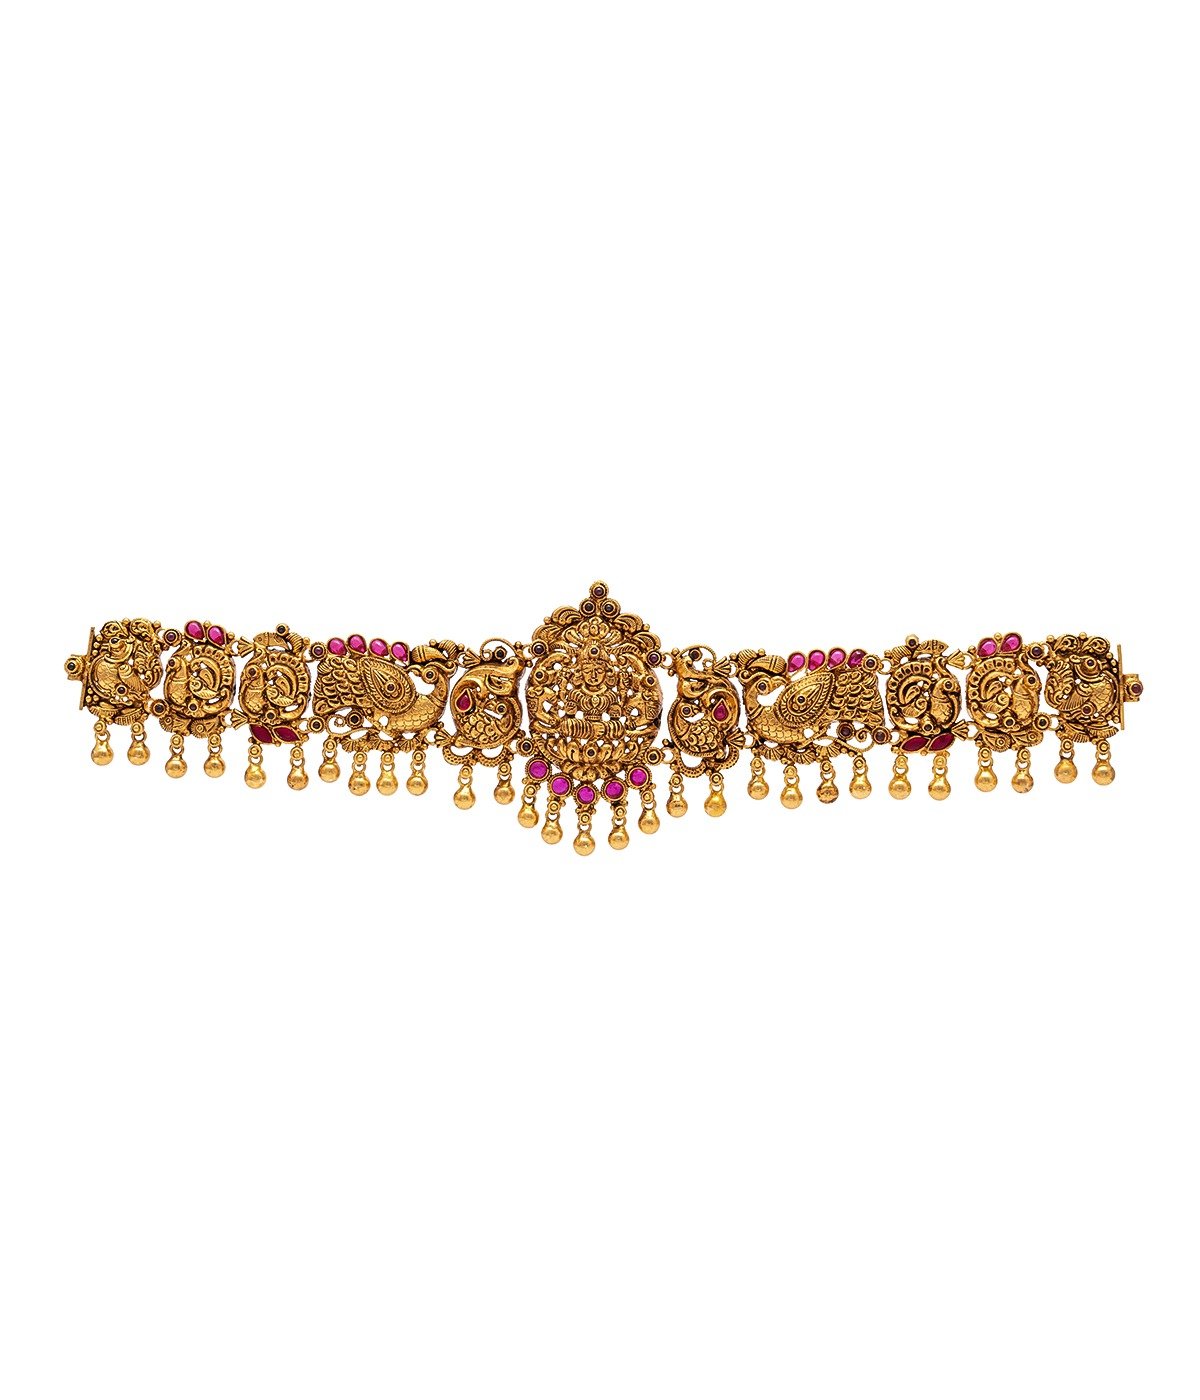 GOLD POLISHED LAKSHMI DESIGN PINK STONE STUDDED WAISTCHAIN WITH GOLD BEADS